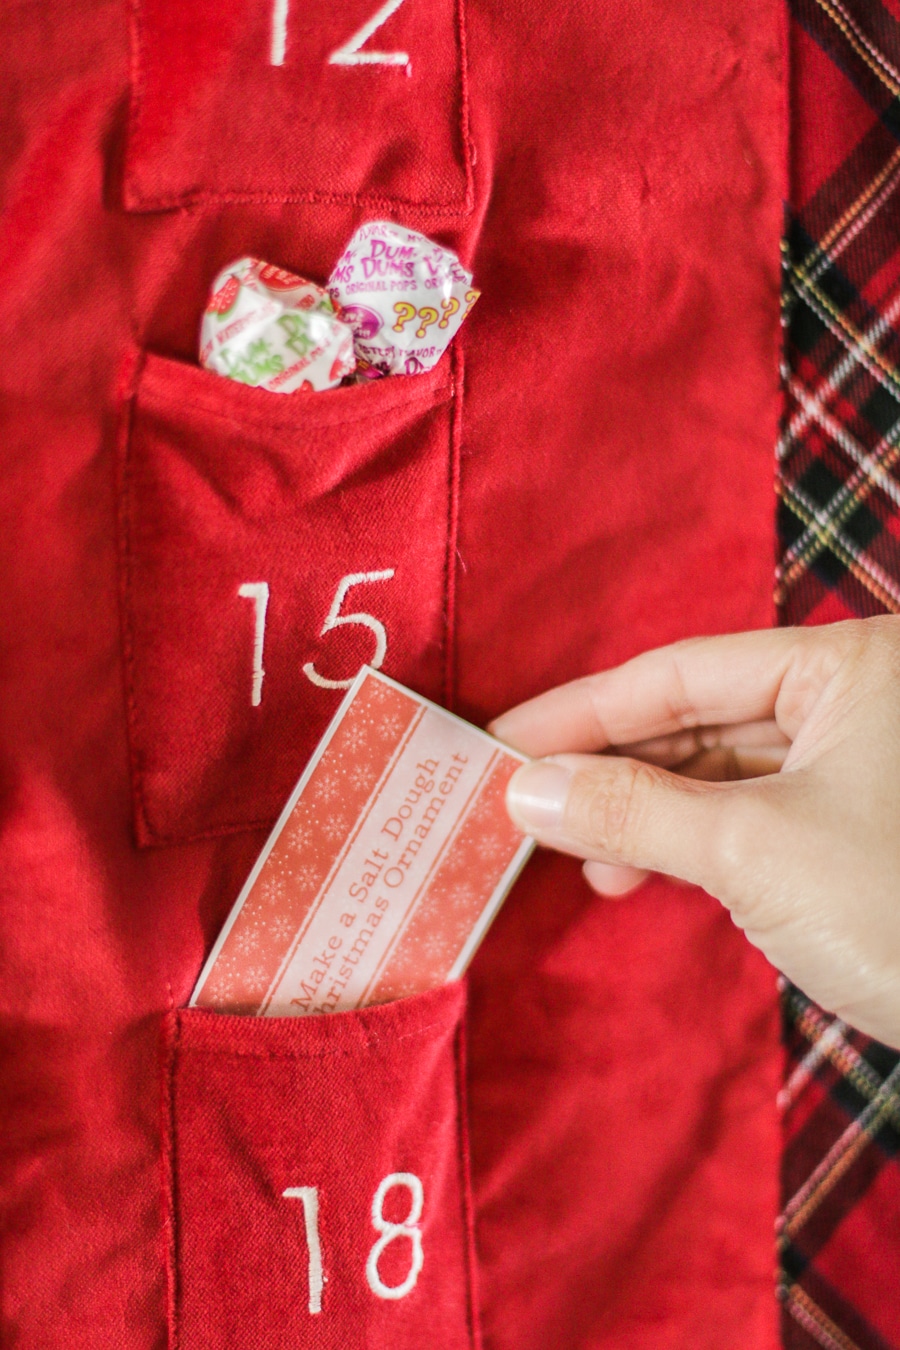 Fill your advent calendar with fun activities and random acts of kindness